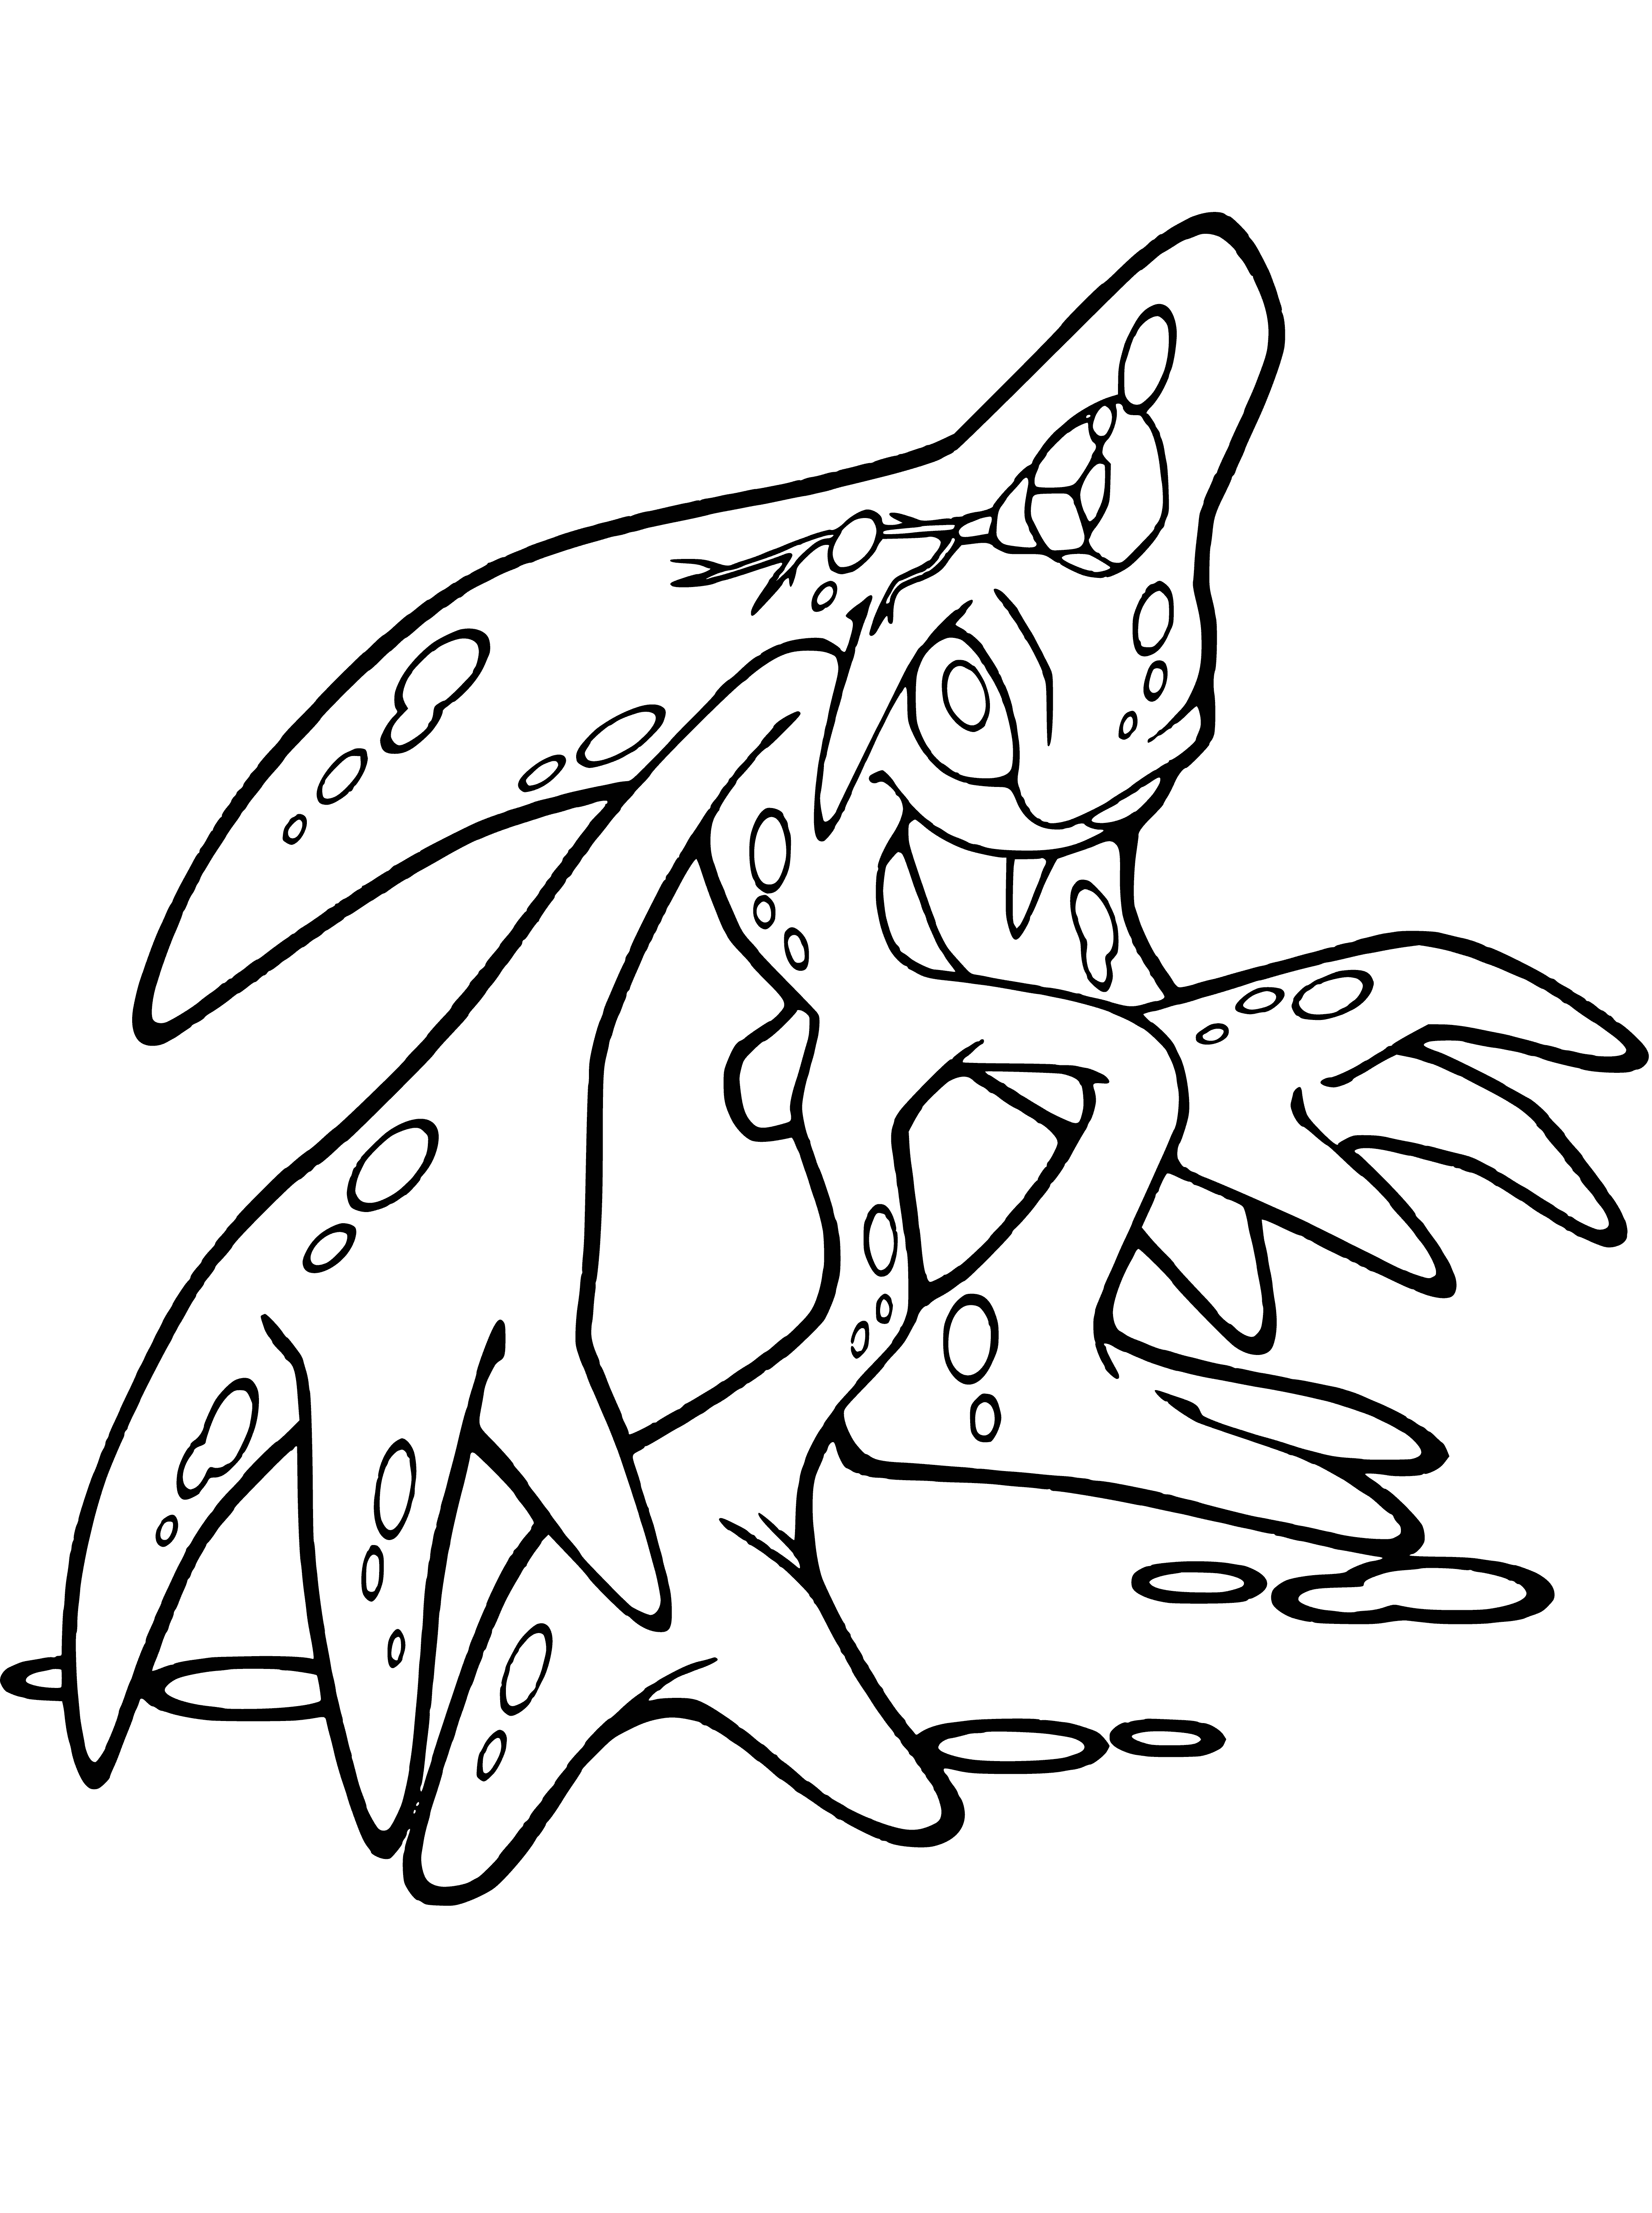 Chaos coloring page